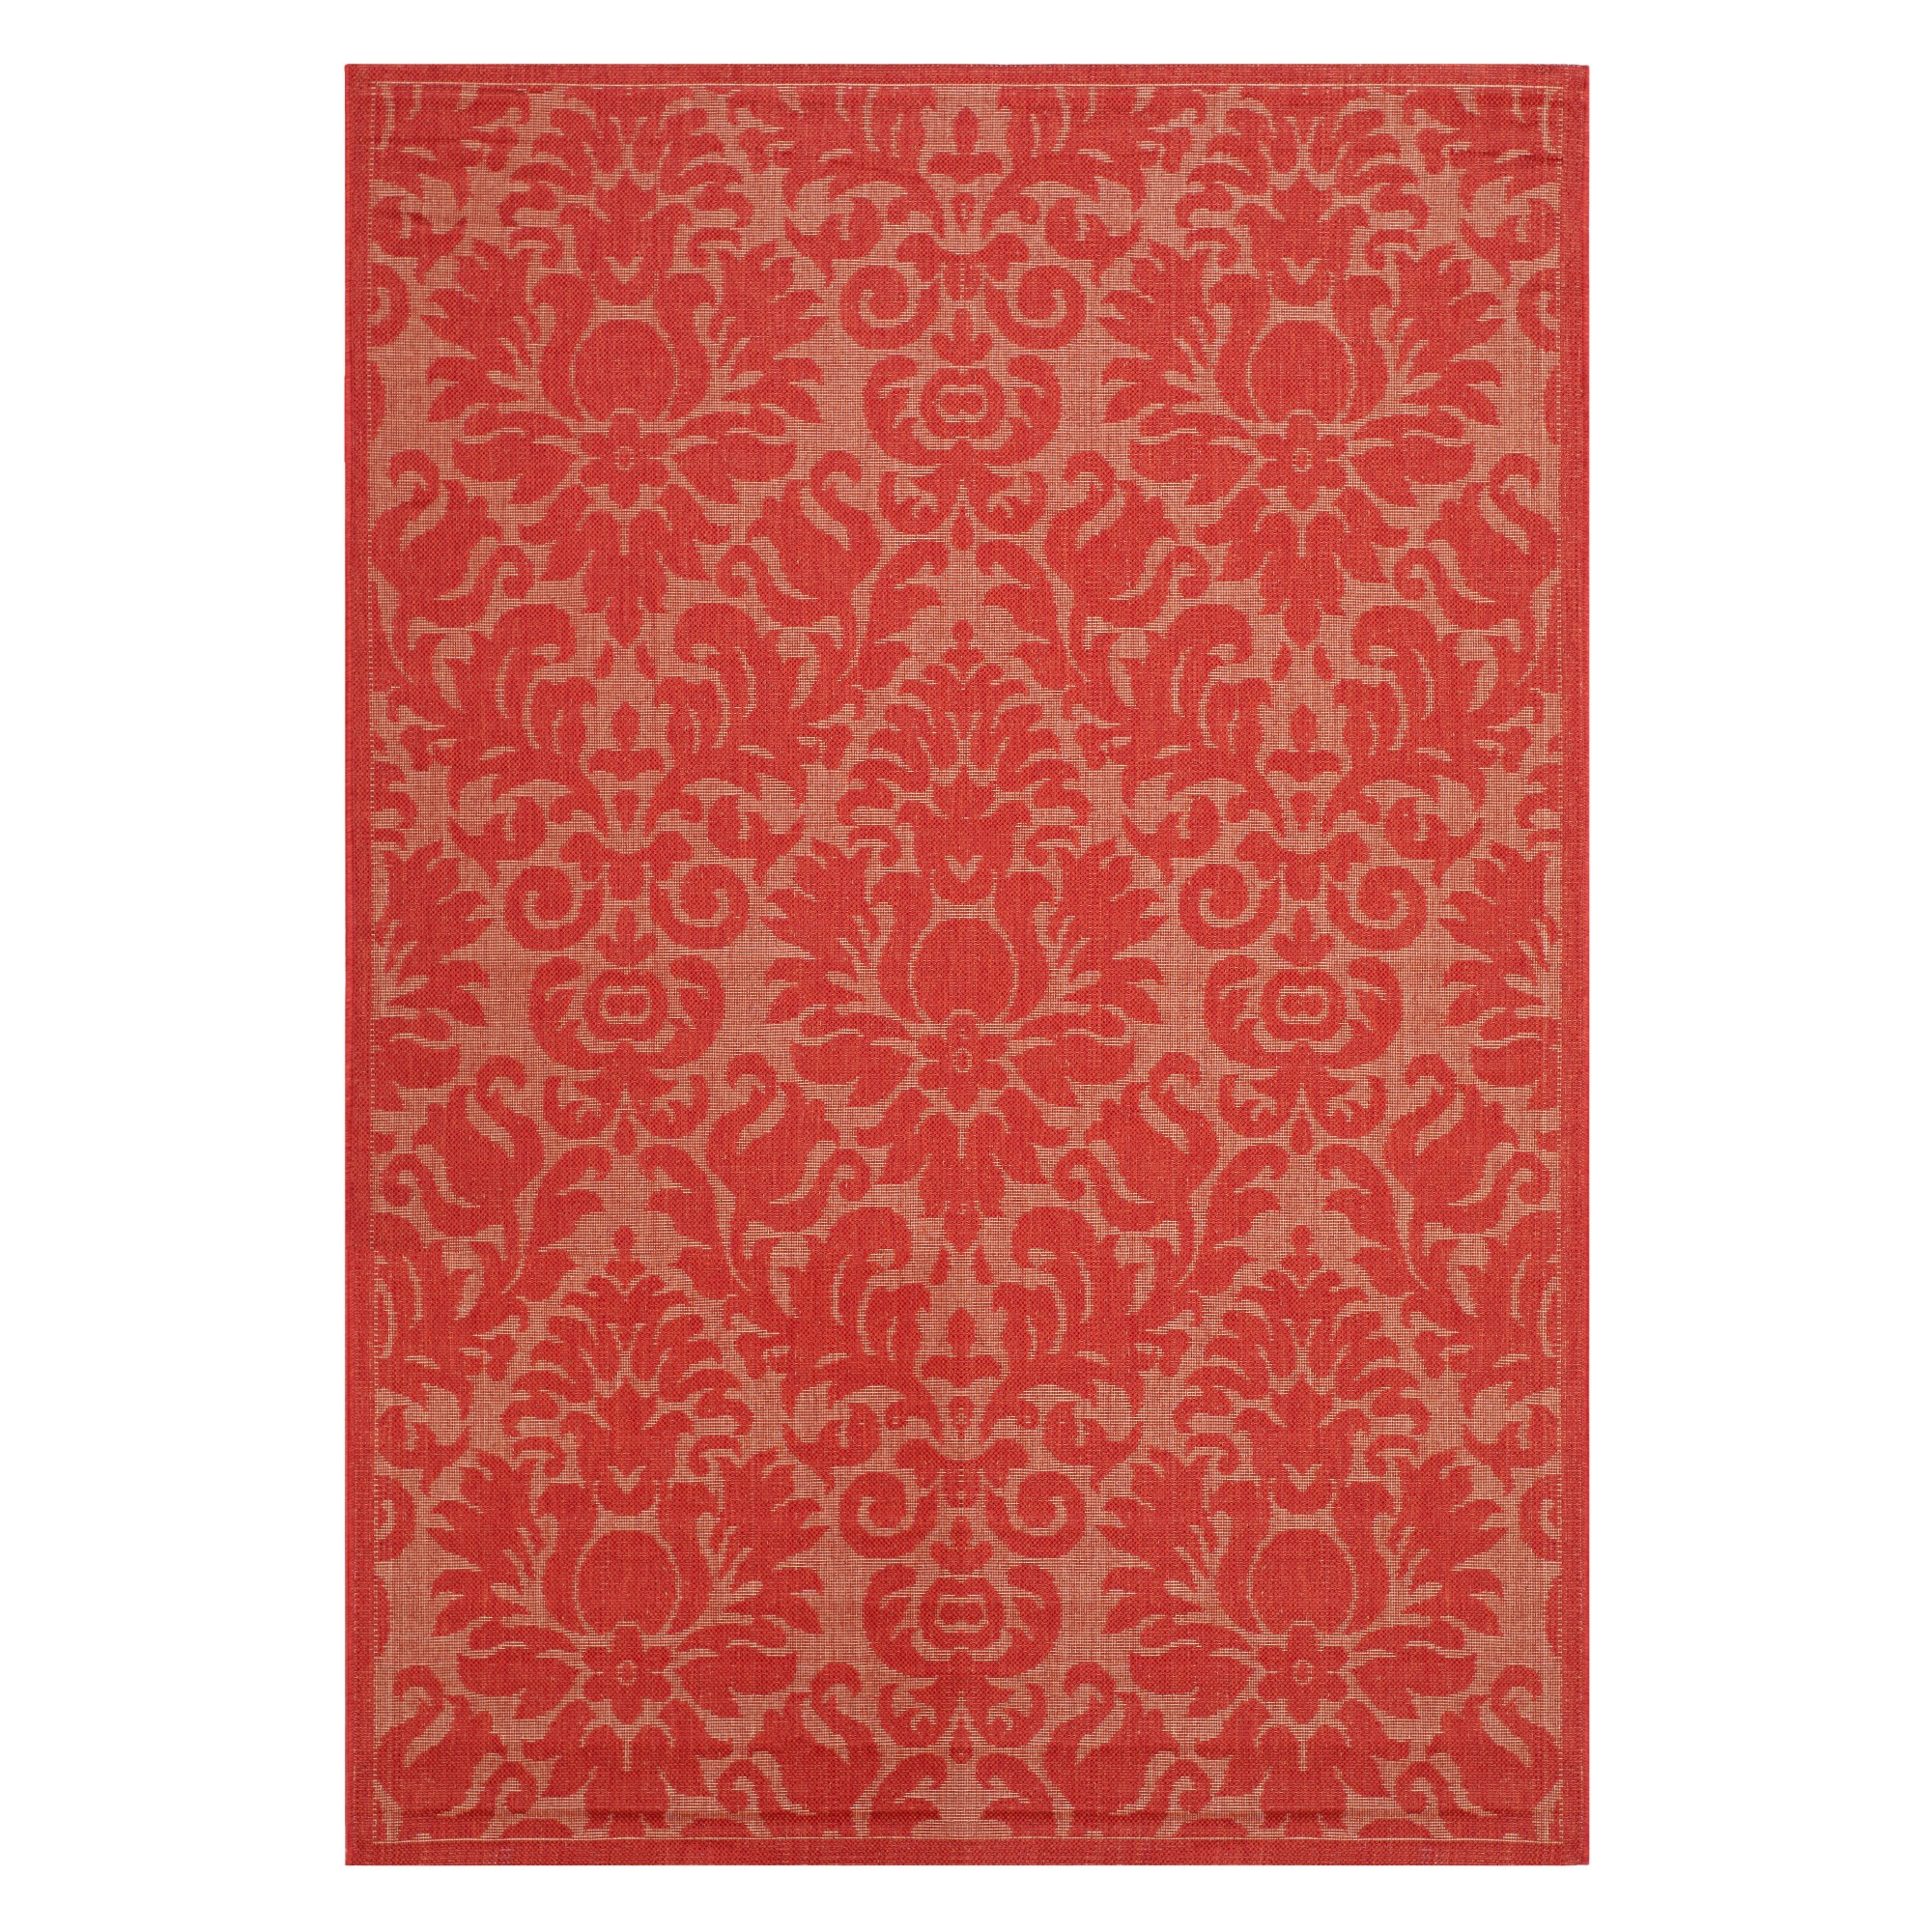 '5'3''X7'7'' Rectangle Dorchester Damask Outdoor Rug Red - Safavieh, Size: 5'3'' X 7'7'''